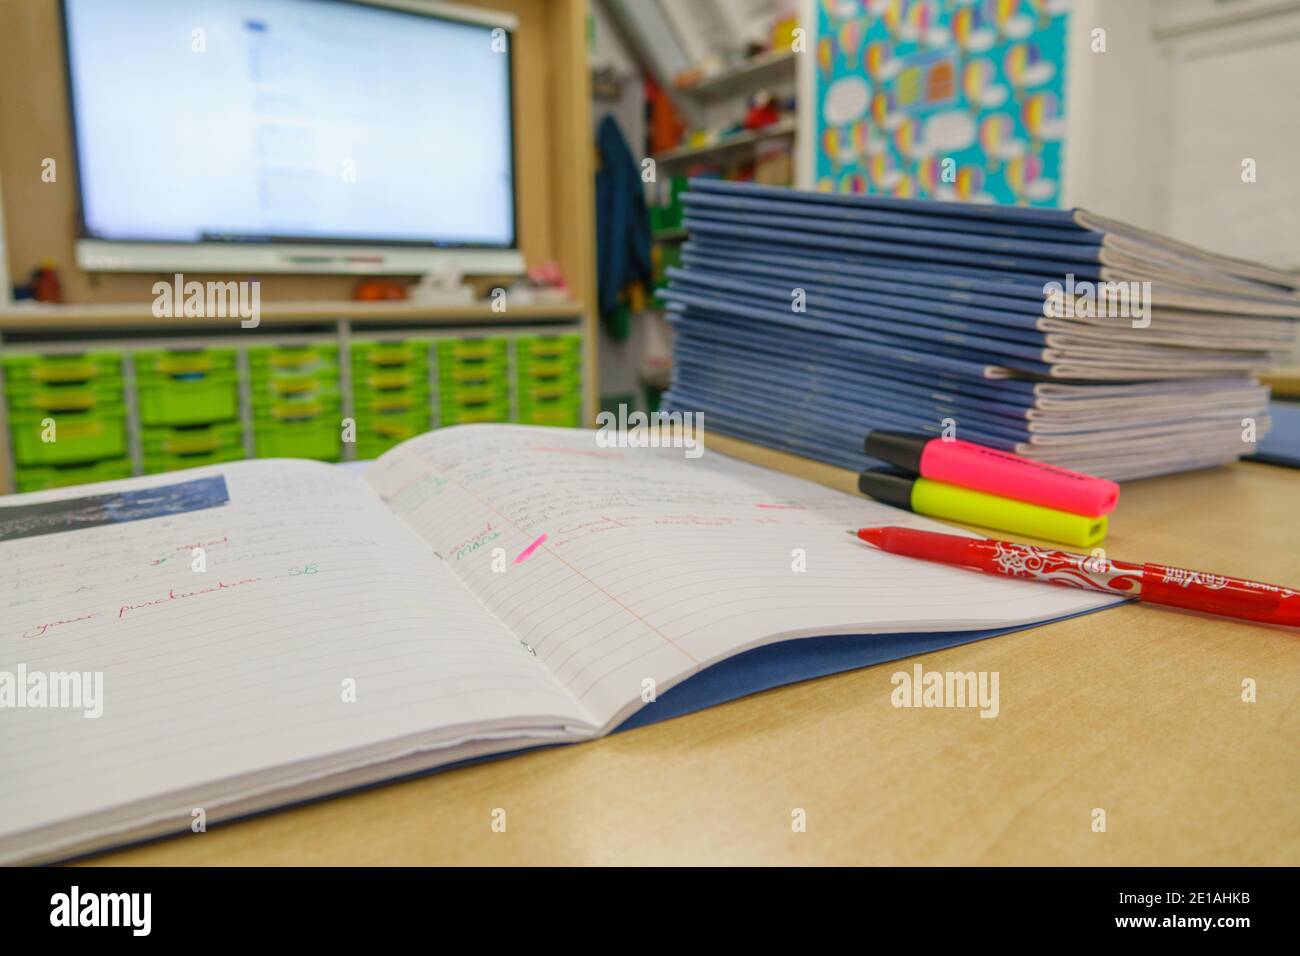 Pile of school books, on a desk, that a teacher is marking, in an empty primary classroom, with red pen. London, UK. Stock Photo